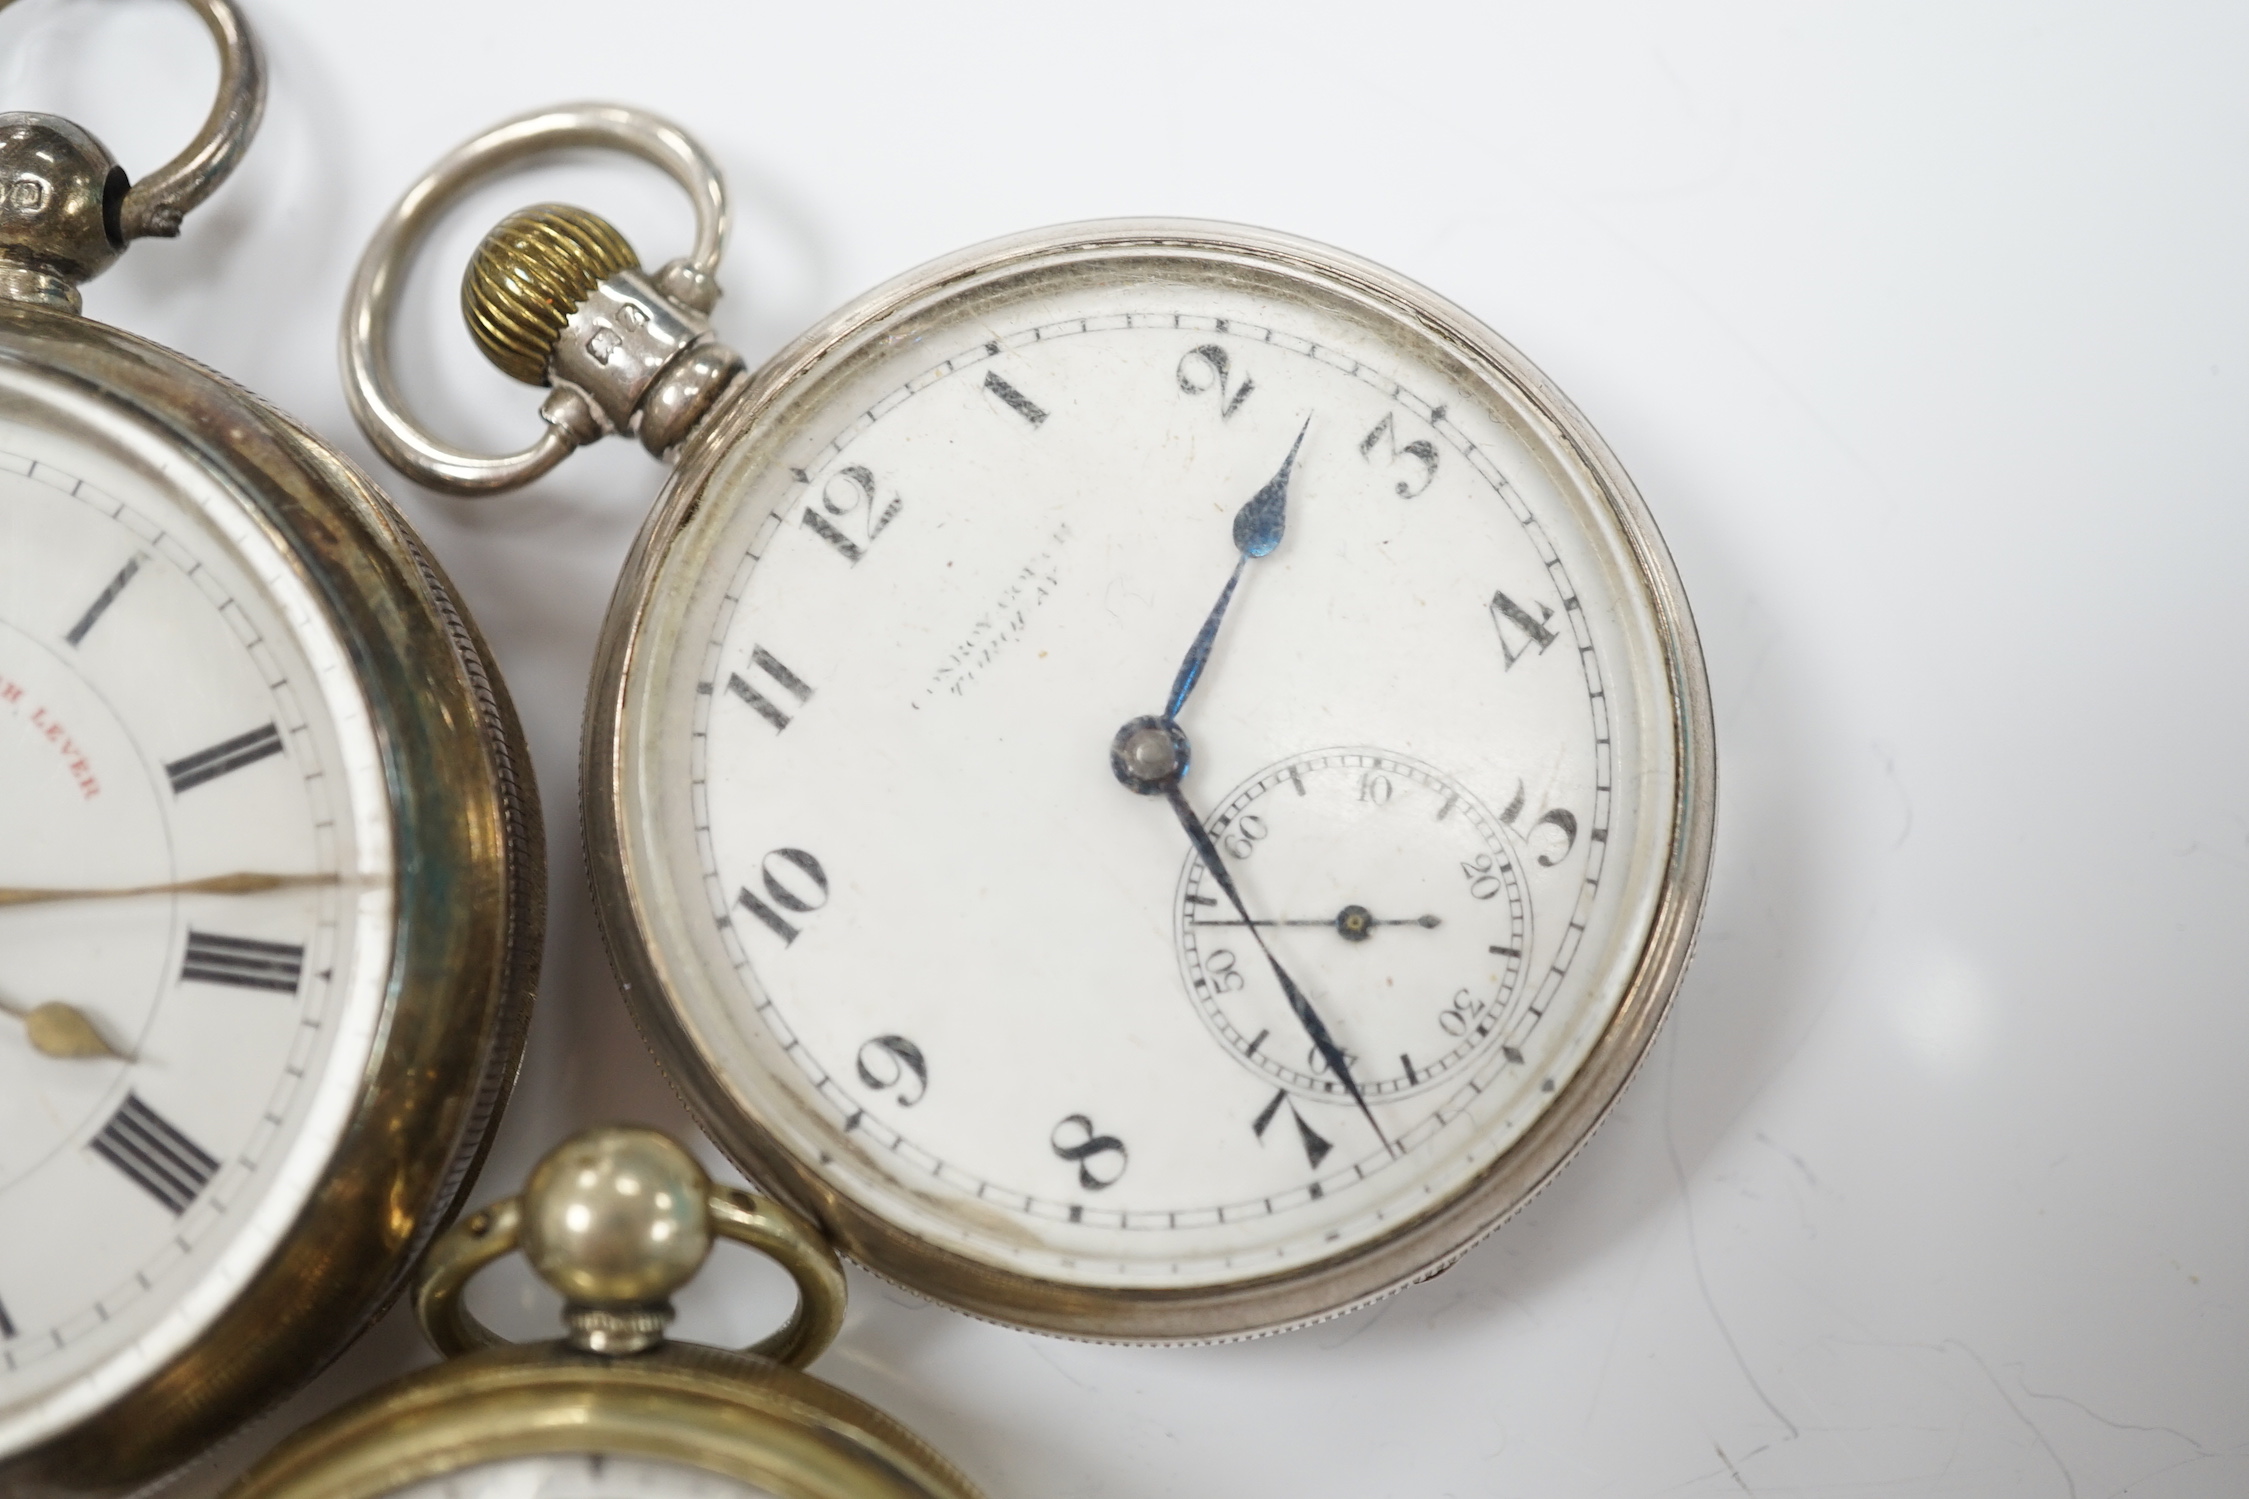 A Georgian gilt metal pair cased pocket watch (lacking outer case) by Masters of Piccadilly, with Roman dial, together with two early 20th century silver open face pocket watches including 'Express English Lever'.